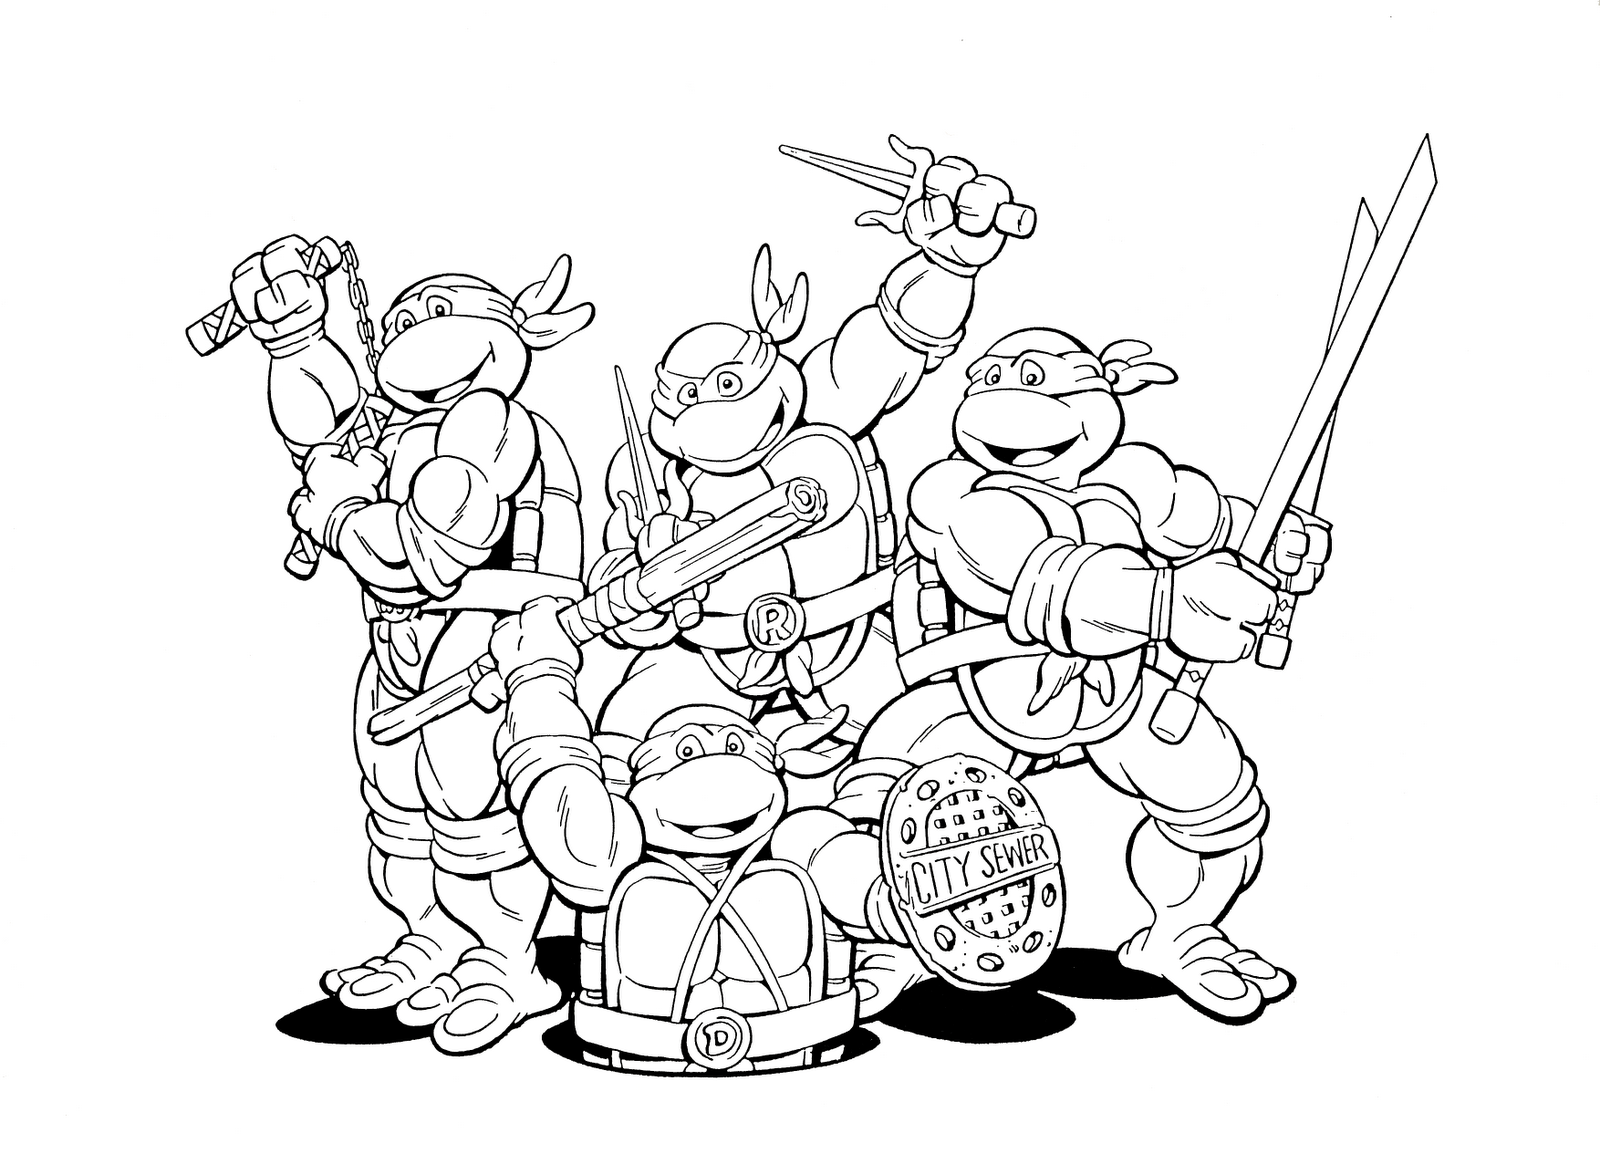 Craftoholic Teenage Mutant Ninja Turtles Coloring Pages Effy Moom Free Coloring Picture wallpaper give a chance to color on the wall without getting in trouble! Fill the walls of your home or office with stress-relieving [effymoom.blogspot.com]